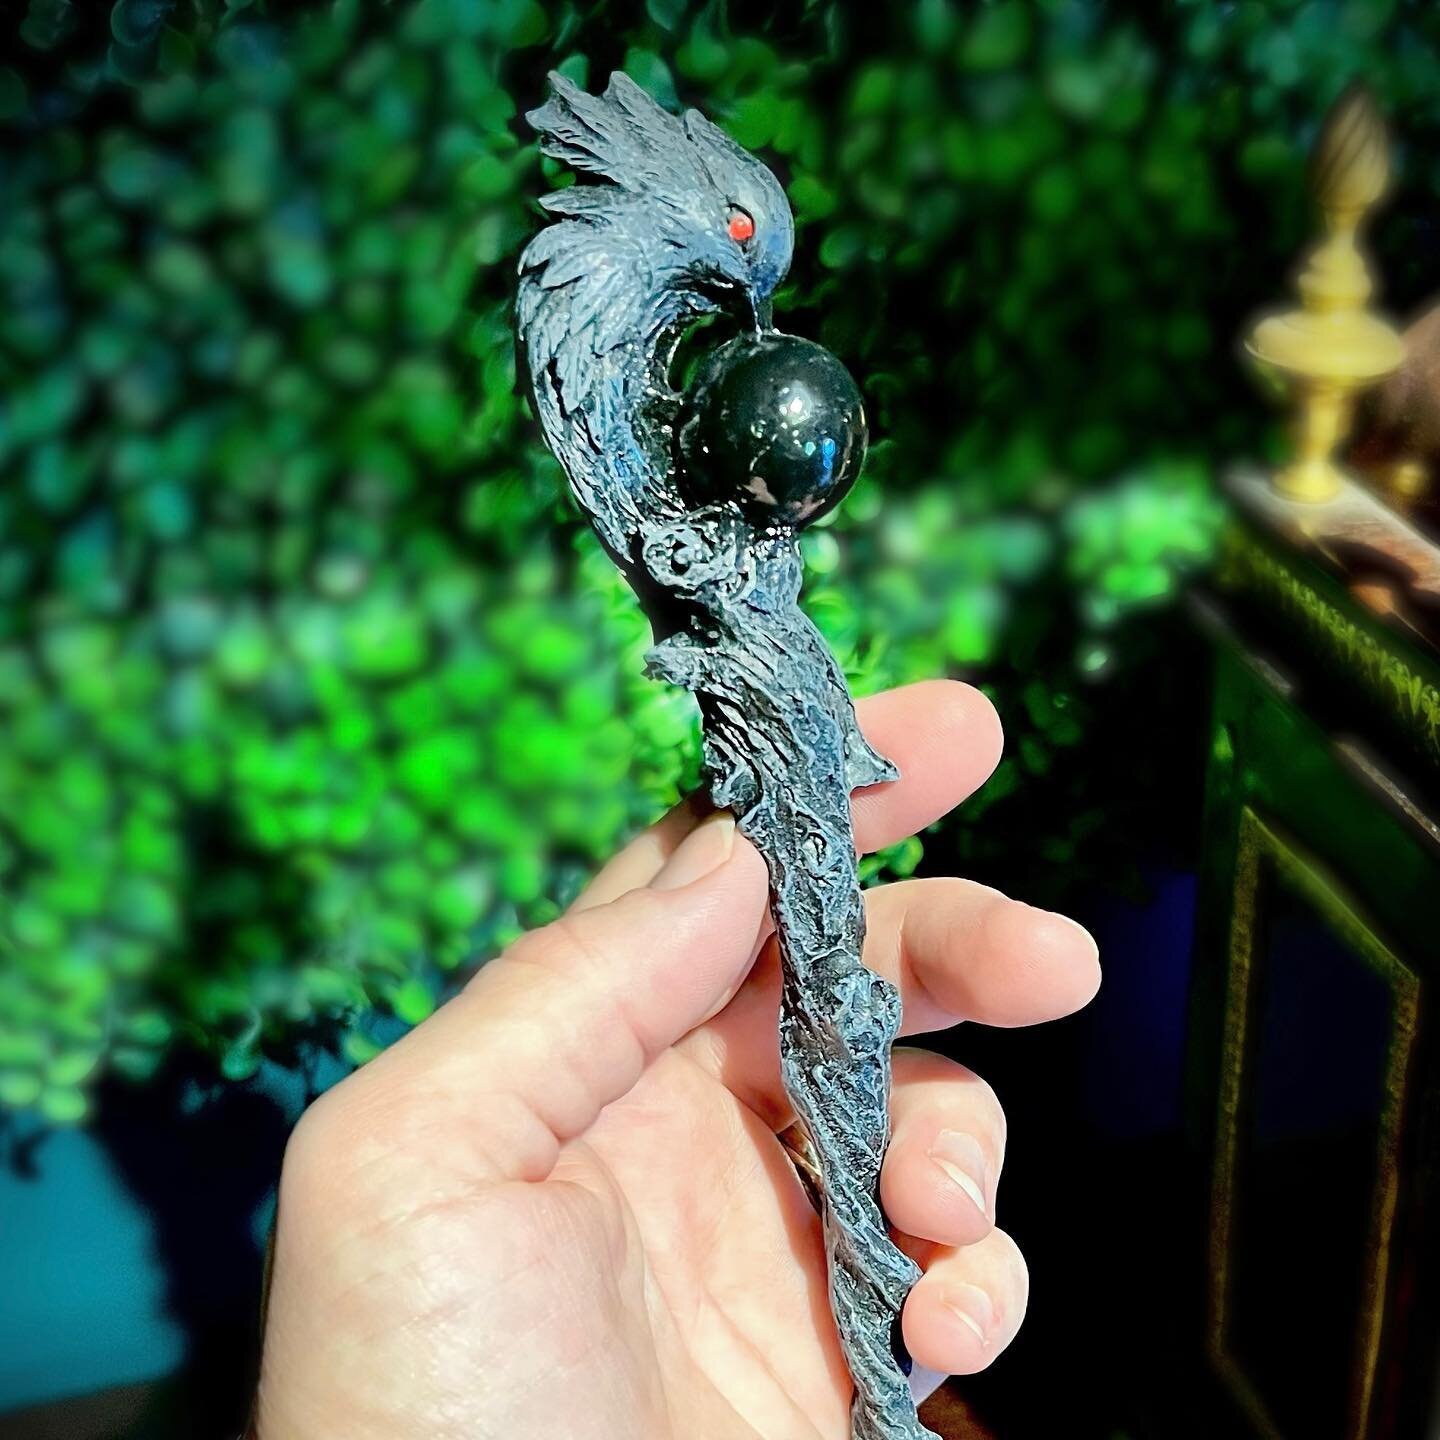 Raven and pentacle wands are back! 🪄Visit us today from 11-5 and make some magic! ✨